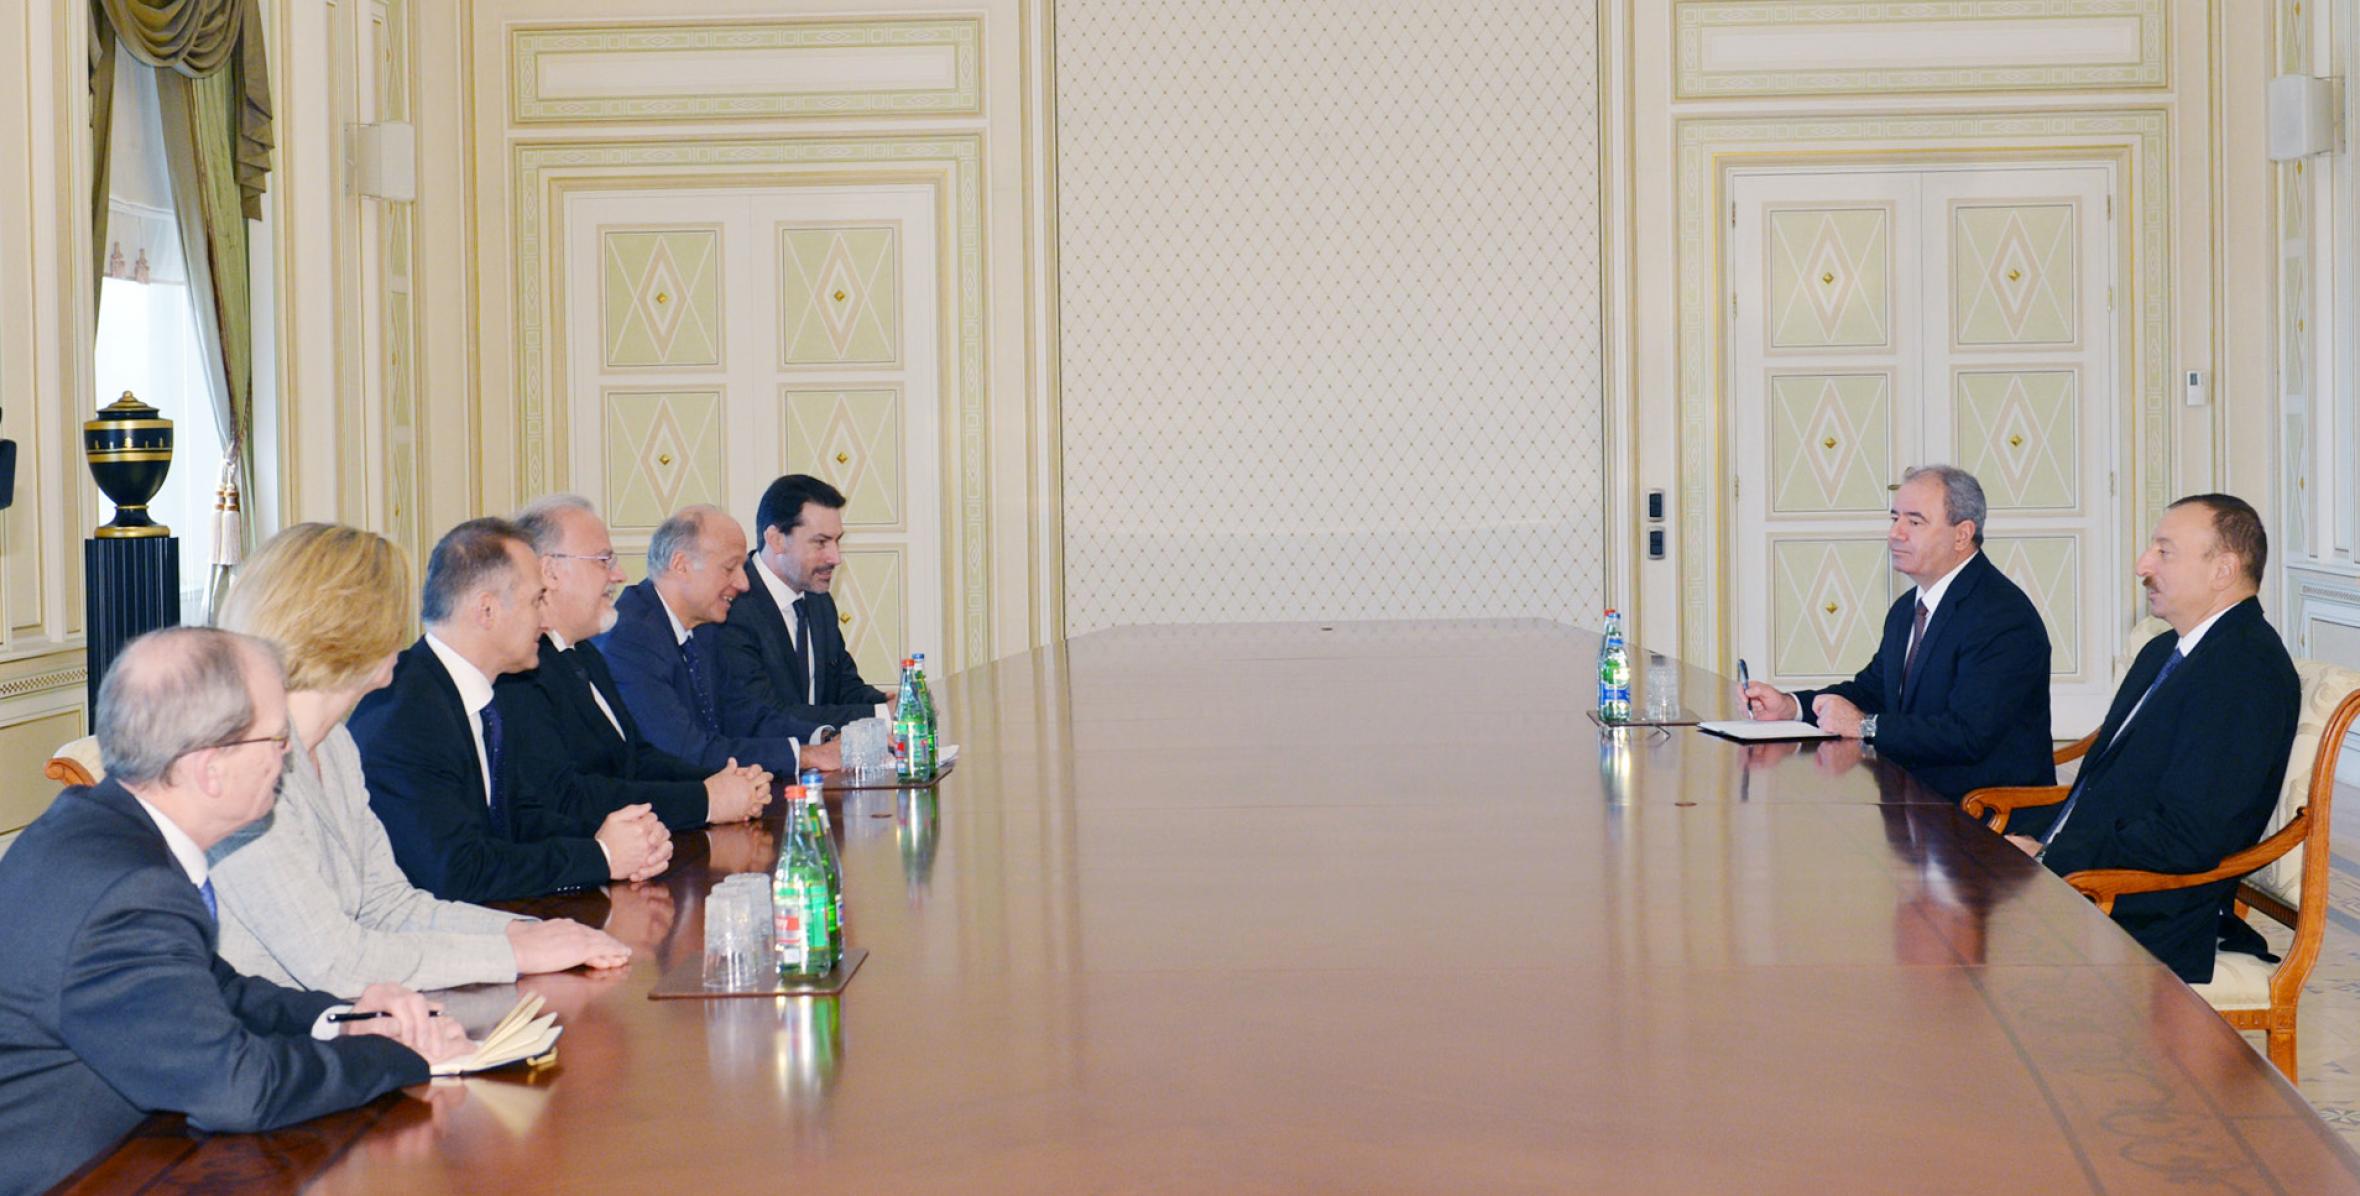 Ilham Aliyev received the Chief Executive Officer of “ASRTIUM” and the Director for International Development of “European Aeronautic Defense and Space”